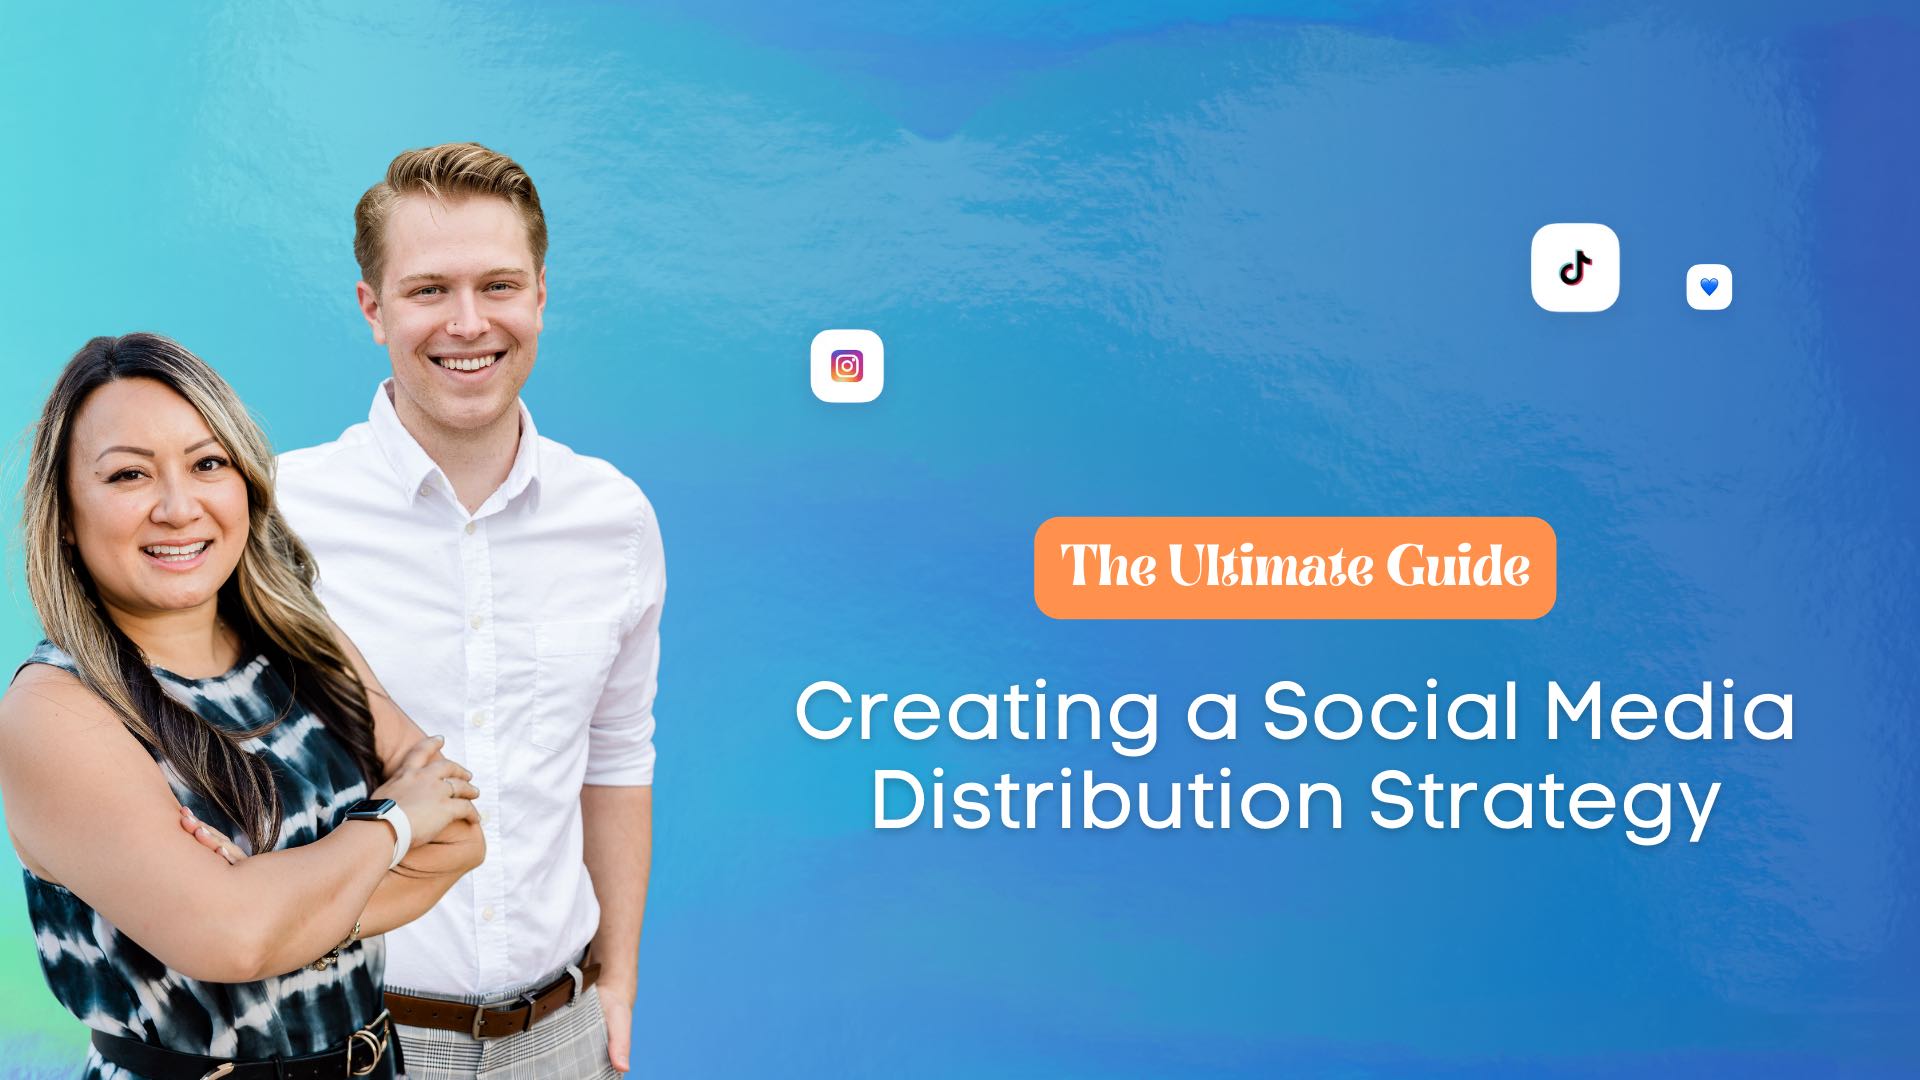 The Ultimate Guide to Creating a Social Media Distribution Strategy - 3